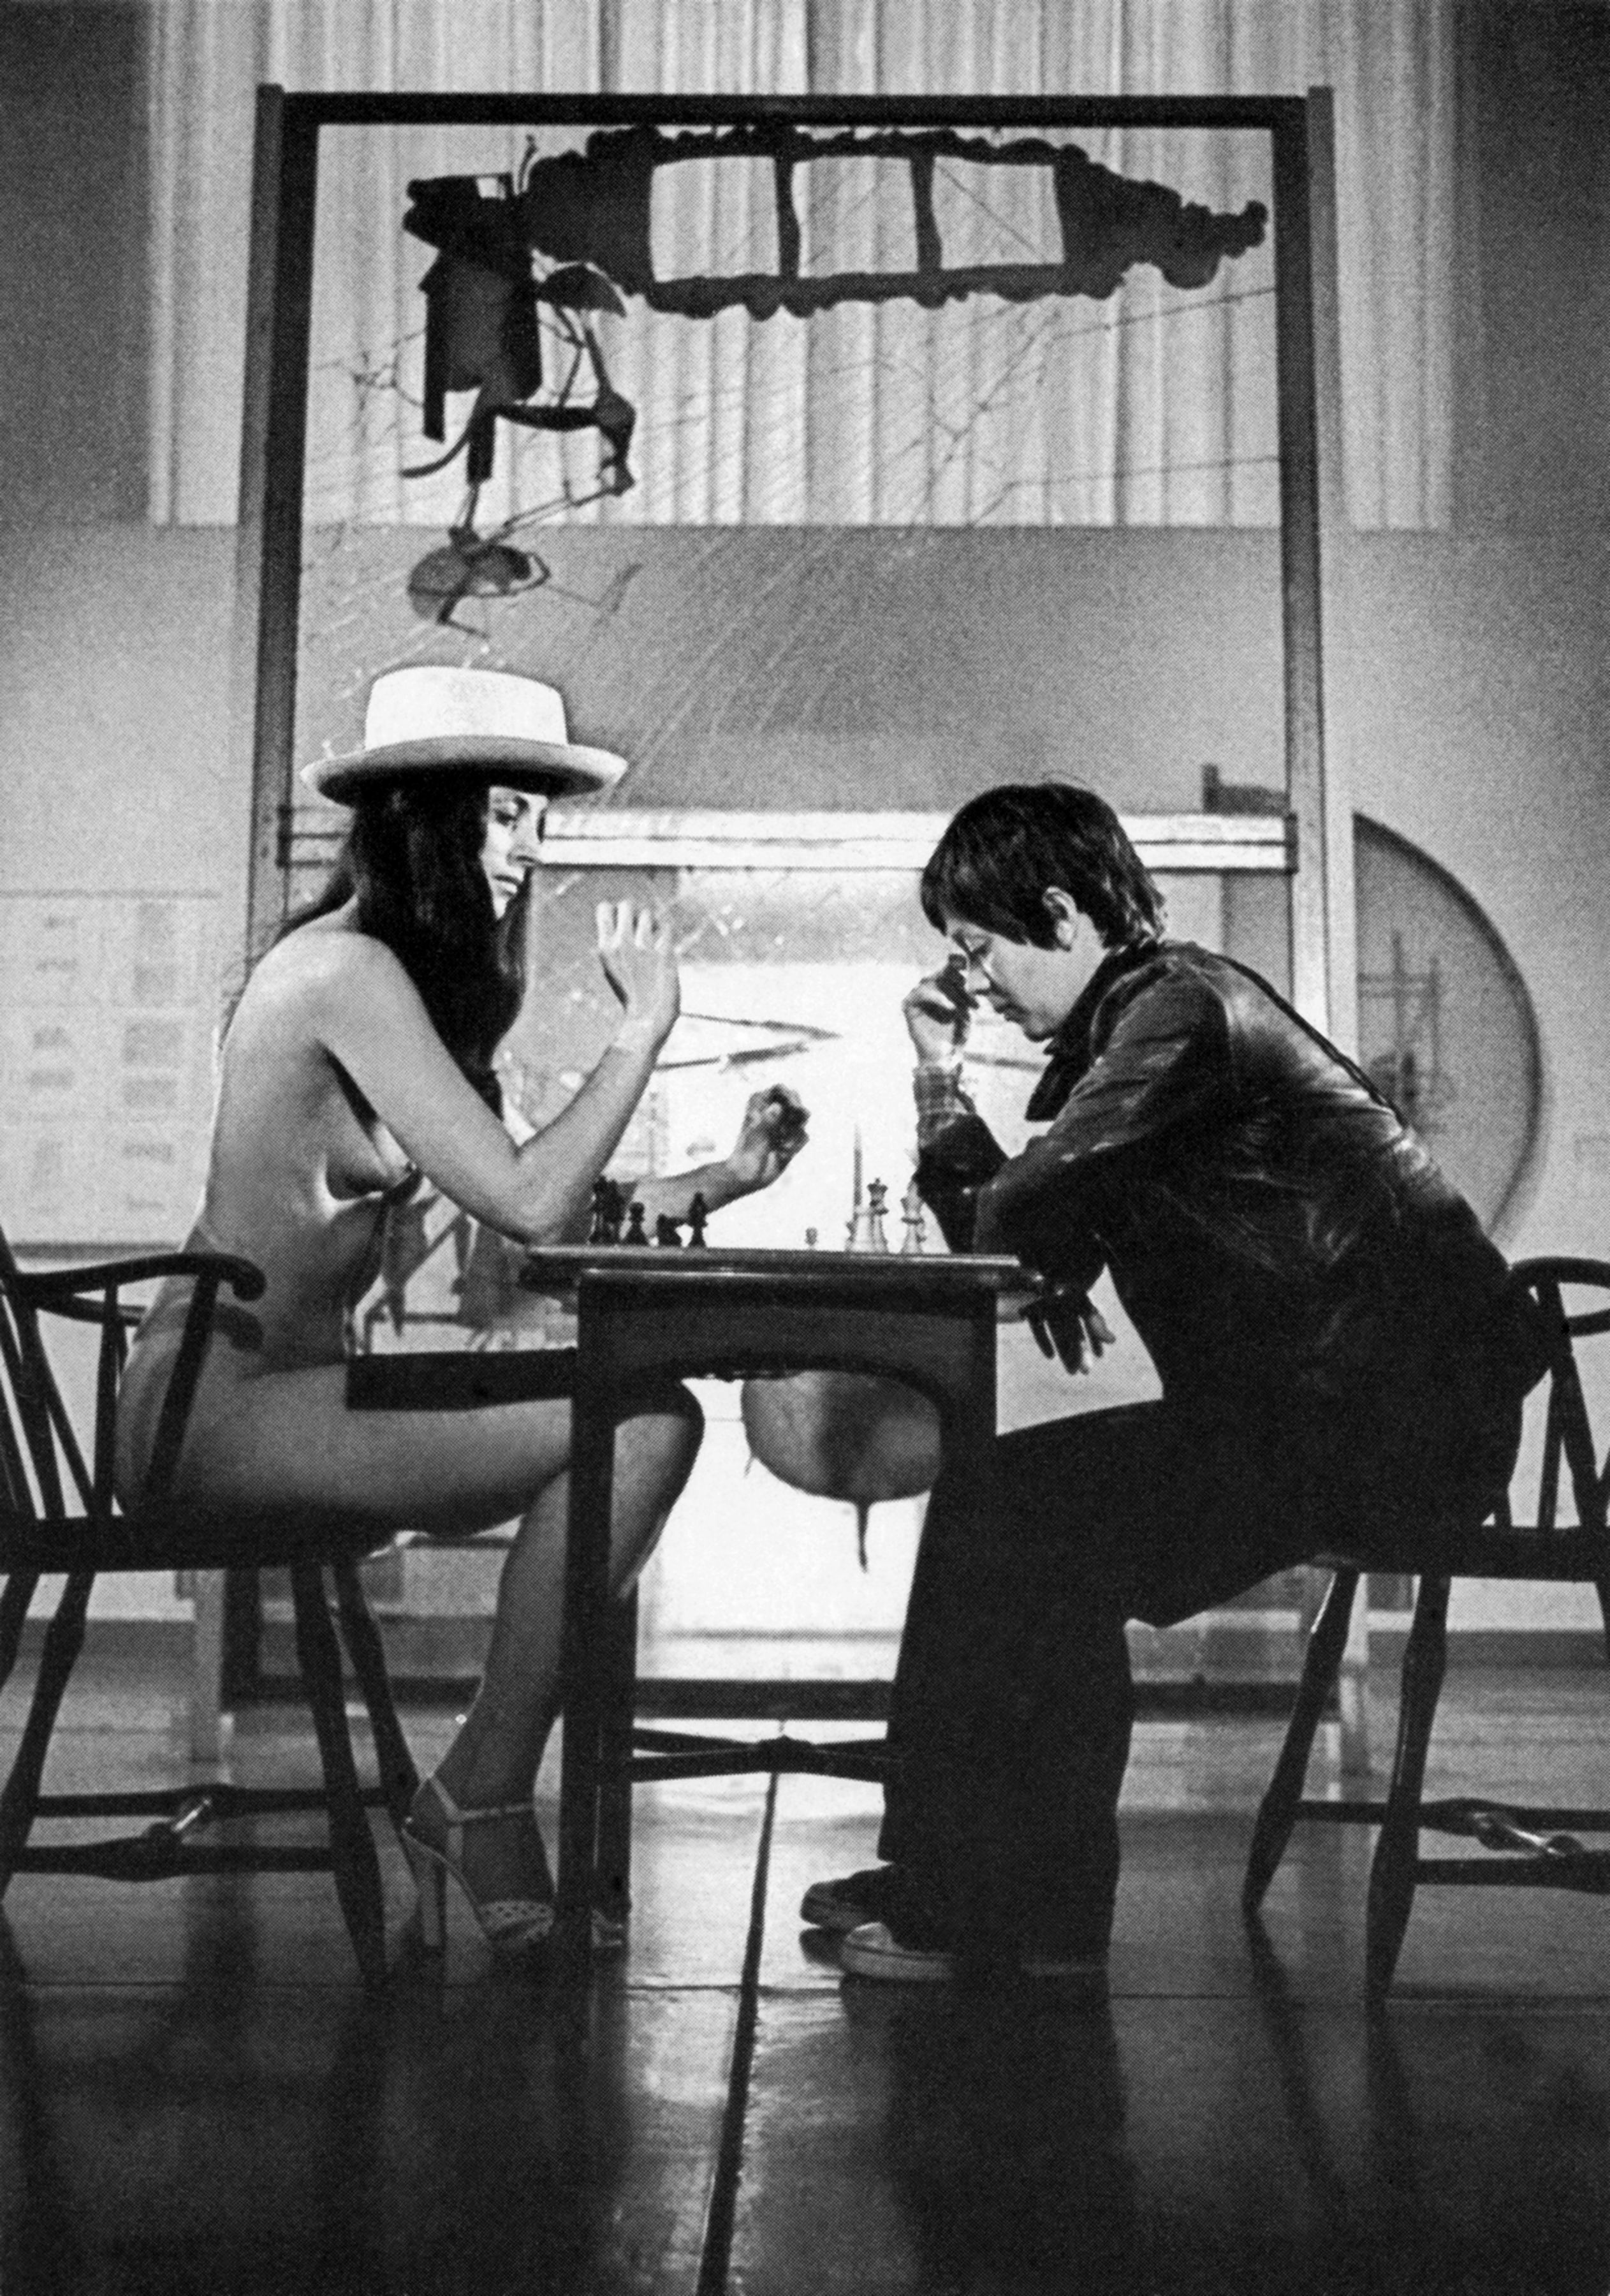 Hannah Wilke
C&amp;rsquo;est La Vie Rrose, 1976
Hannah Wilke playing chess with I Sa Lo in still from
Wilke documentary, Philly, used by Wilke in a poster for
the film C&amp;rsquo;est La Vie Rrose.
Hannah Wilke Collection &amp;amp; Archive, Los Angeles.
Courtesy Electronic Arts Intermix, New York.